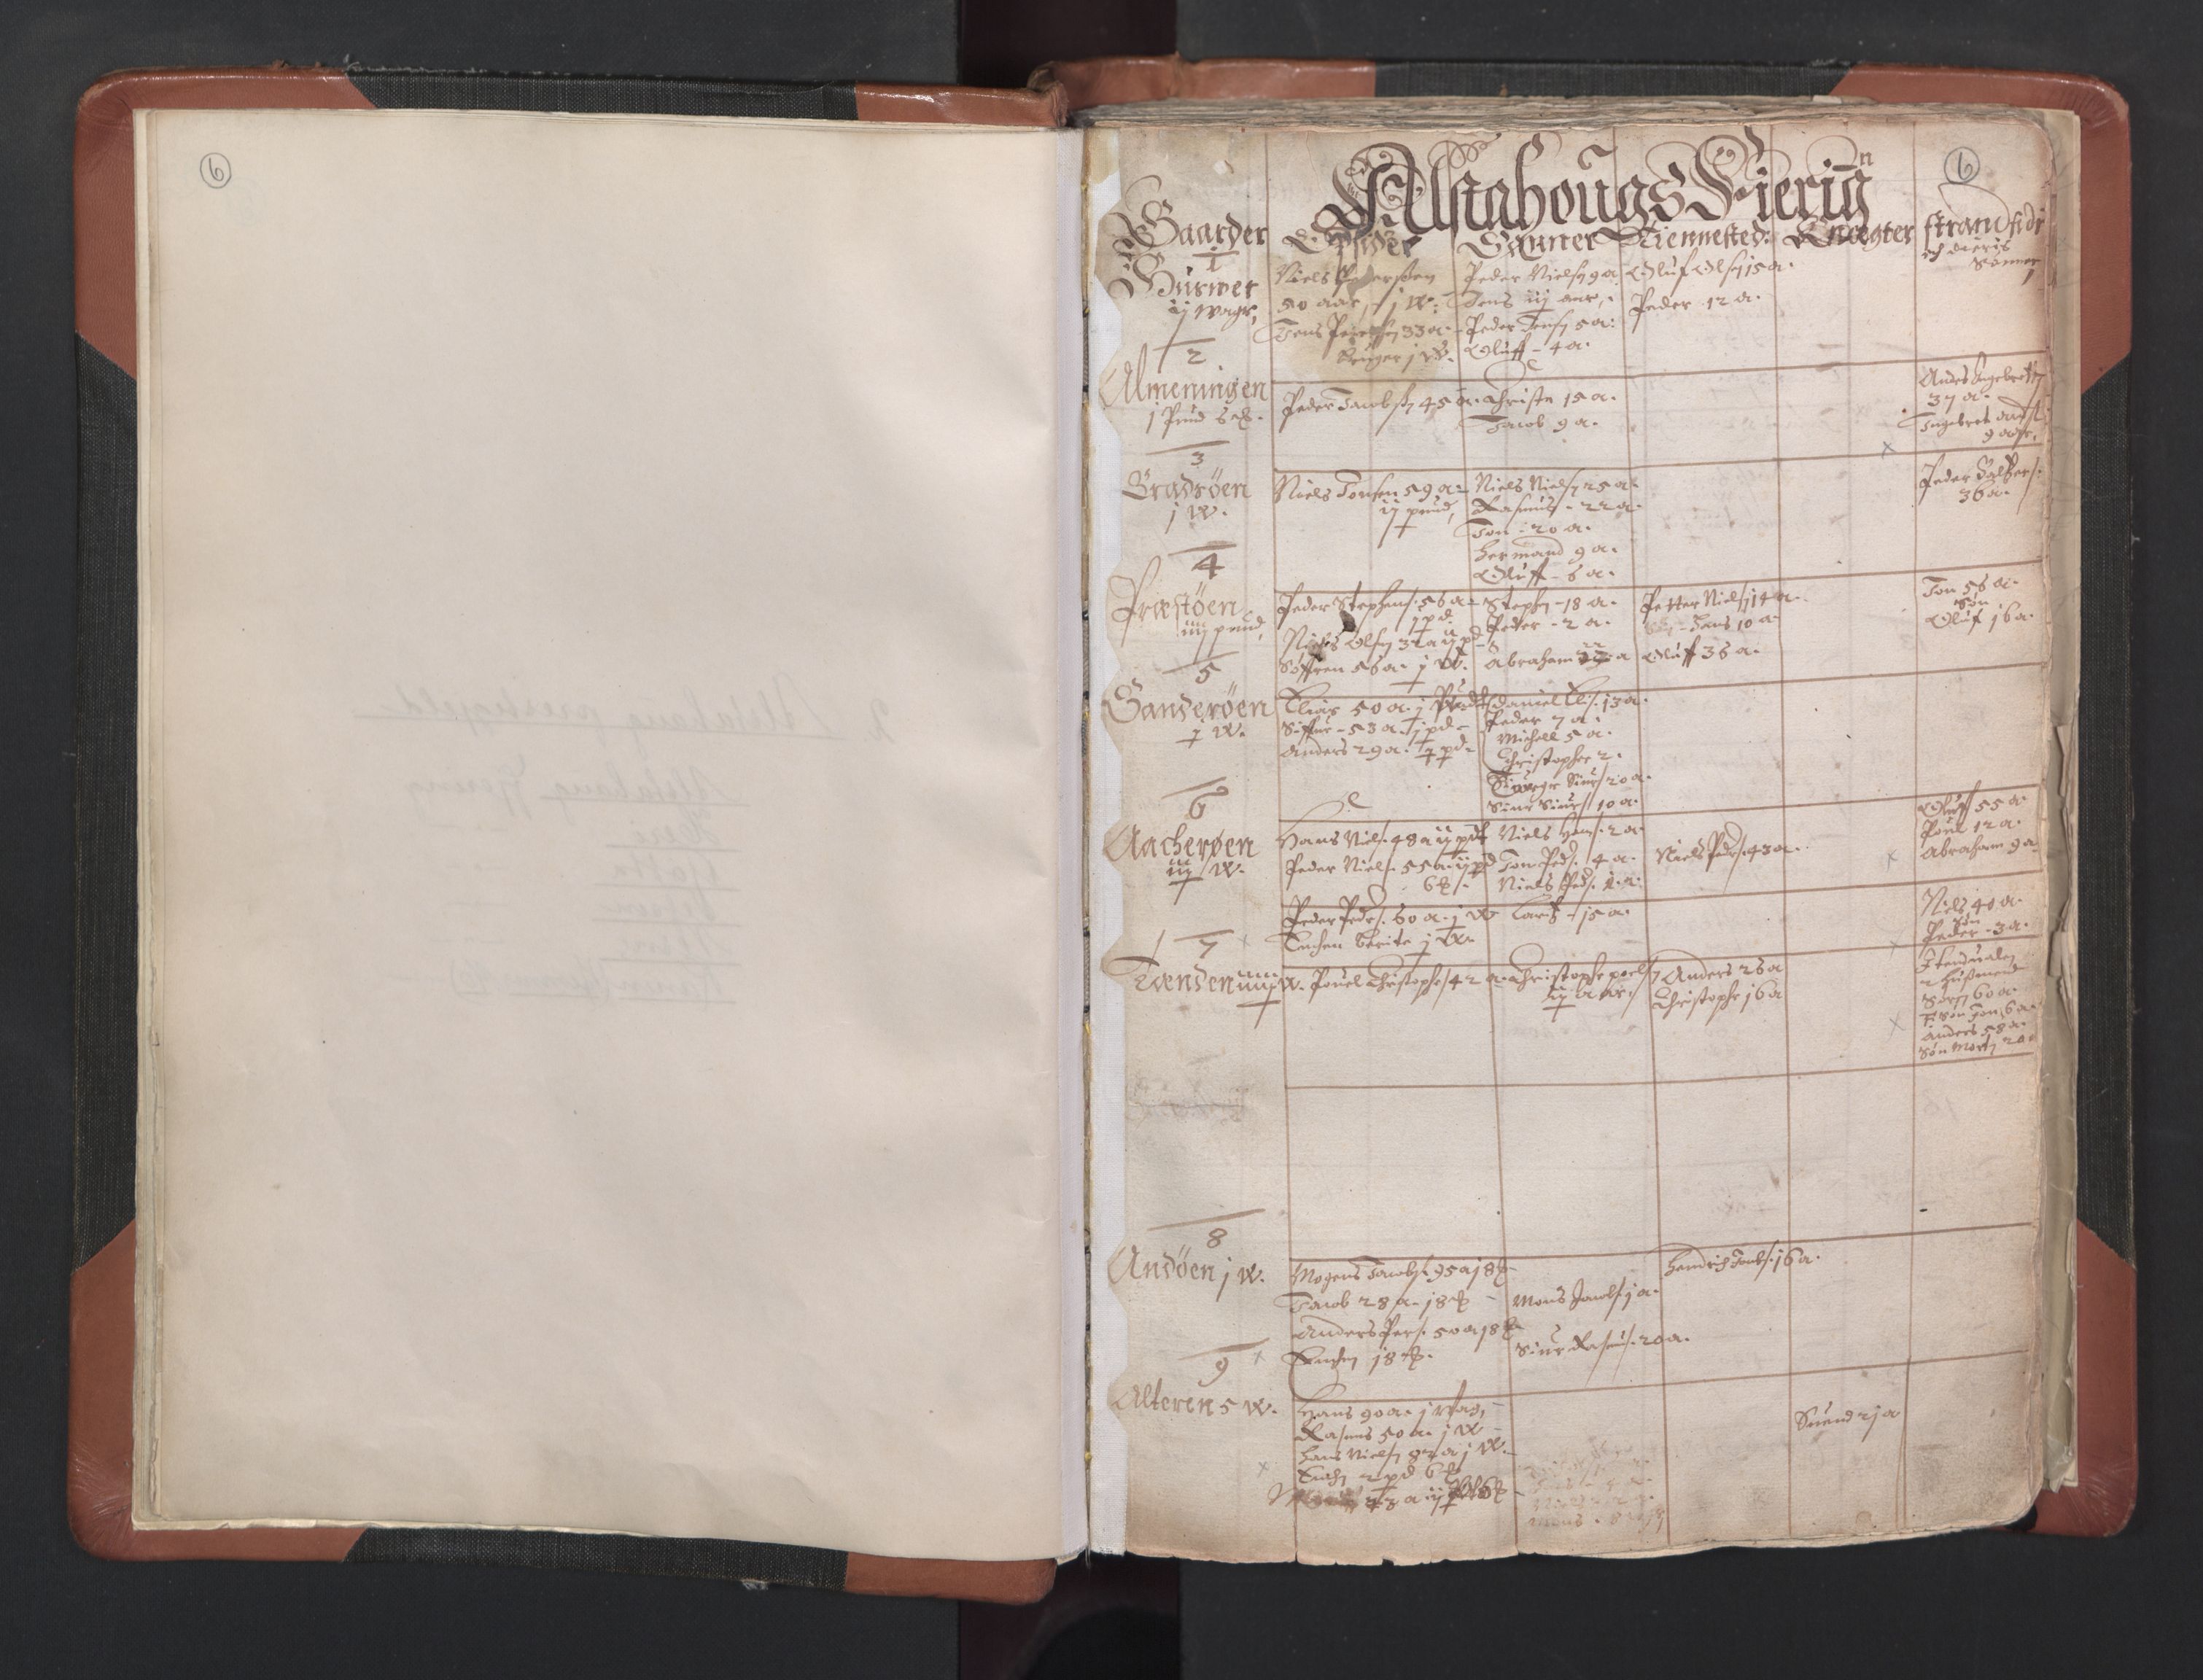 RA, Vicar's Census 1664-1666, no. 35: Helgeland deanery and Salten deanery, 1664-1666, p. 6